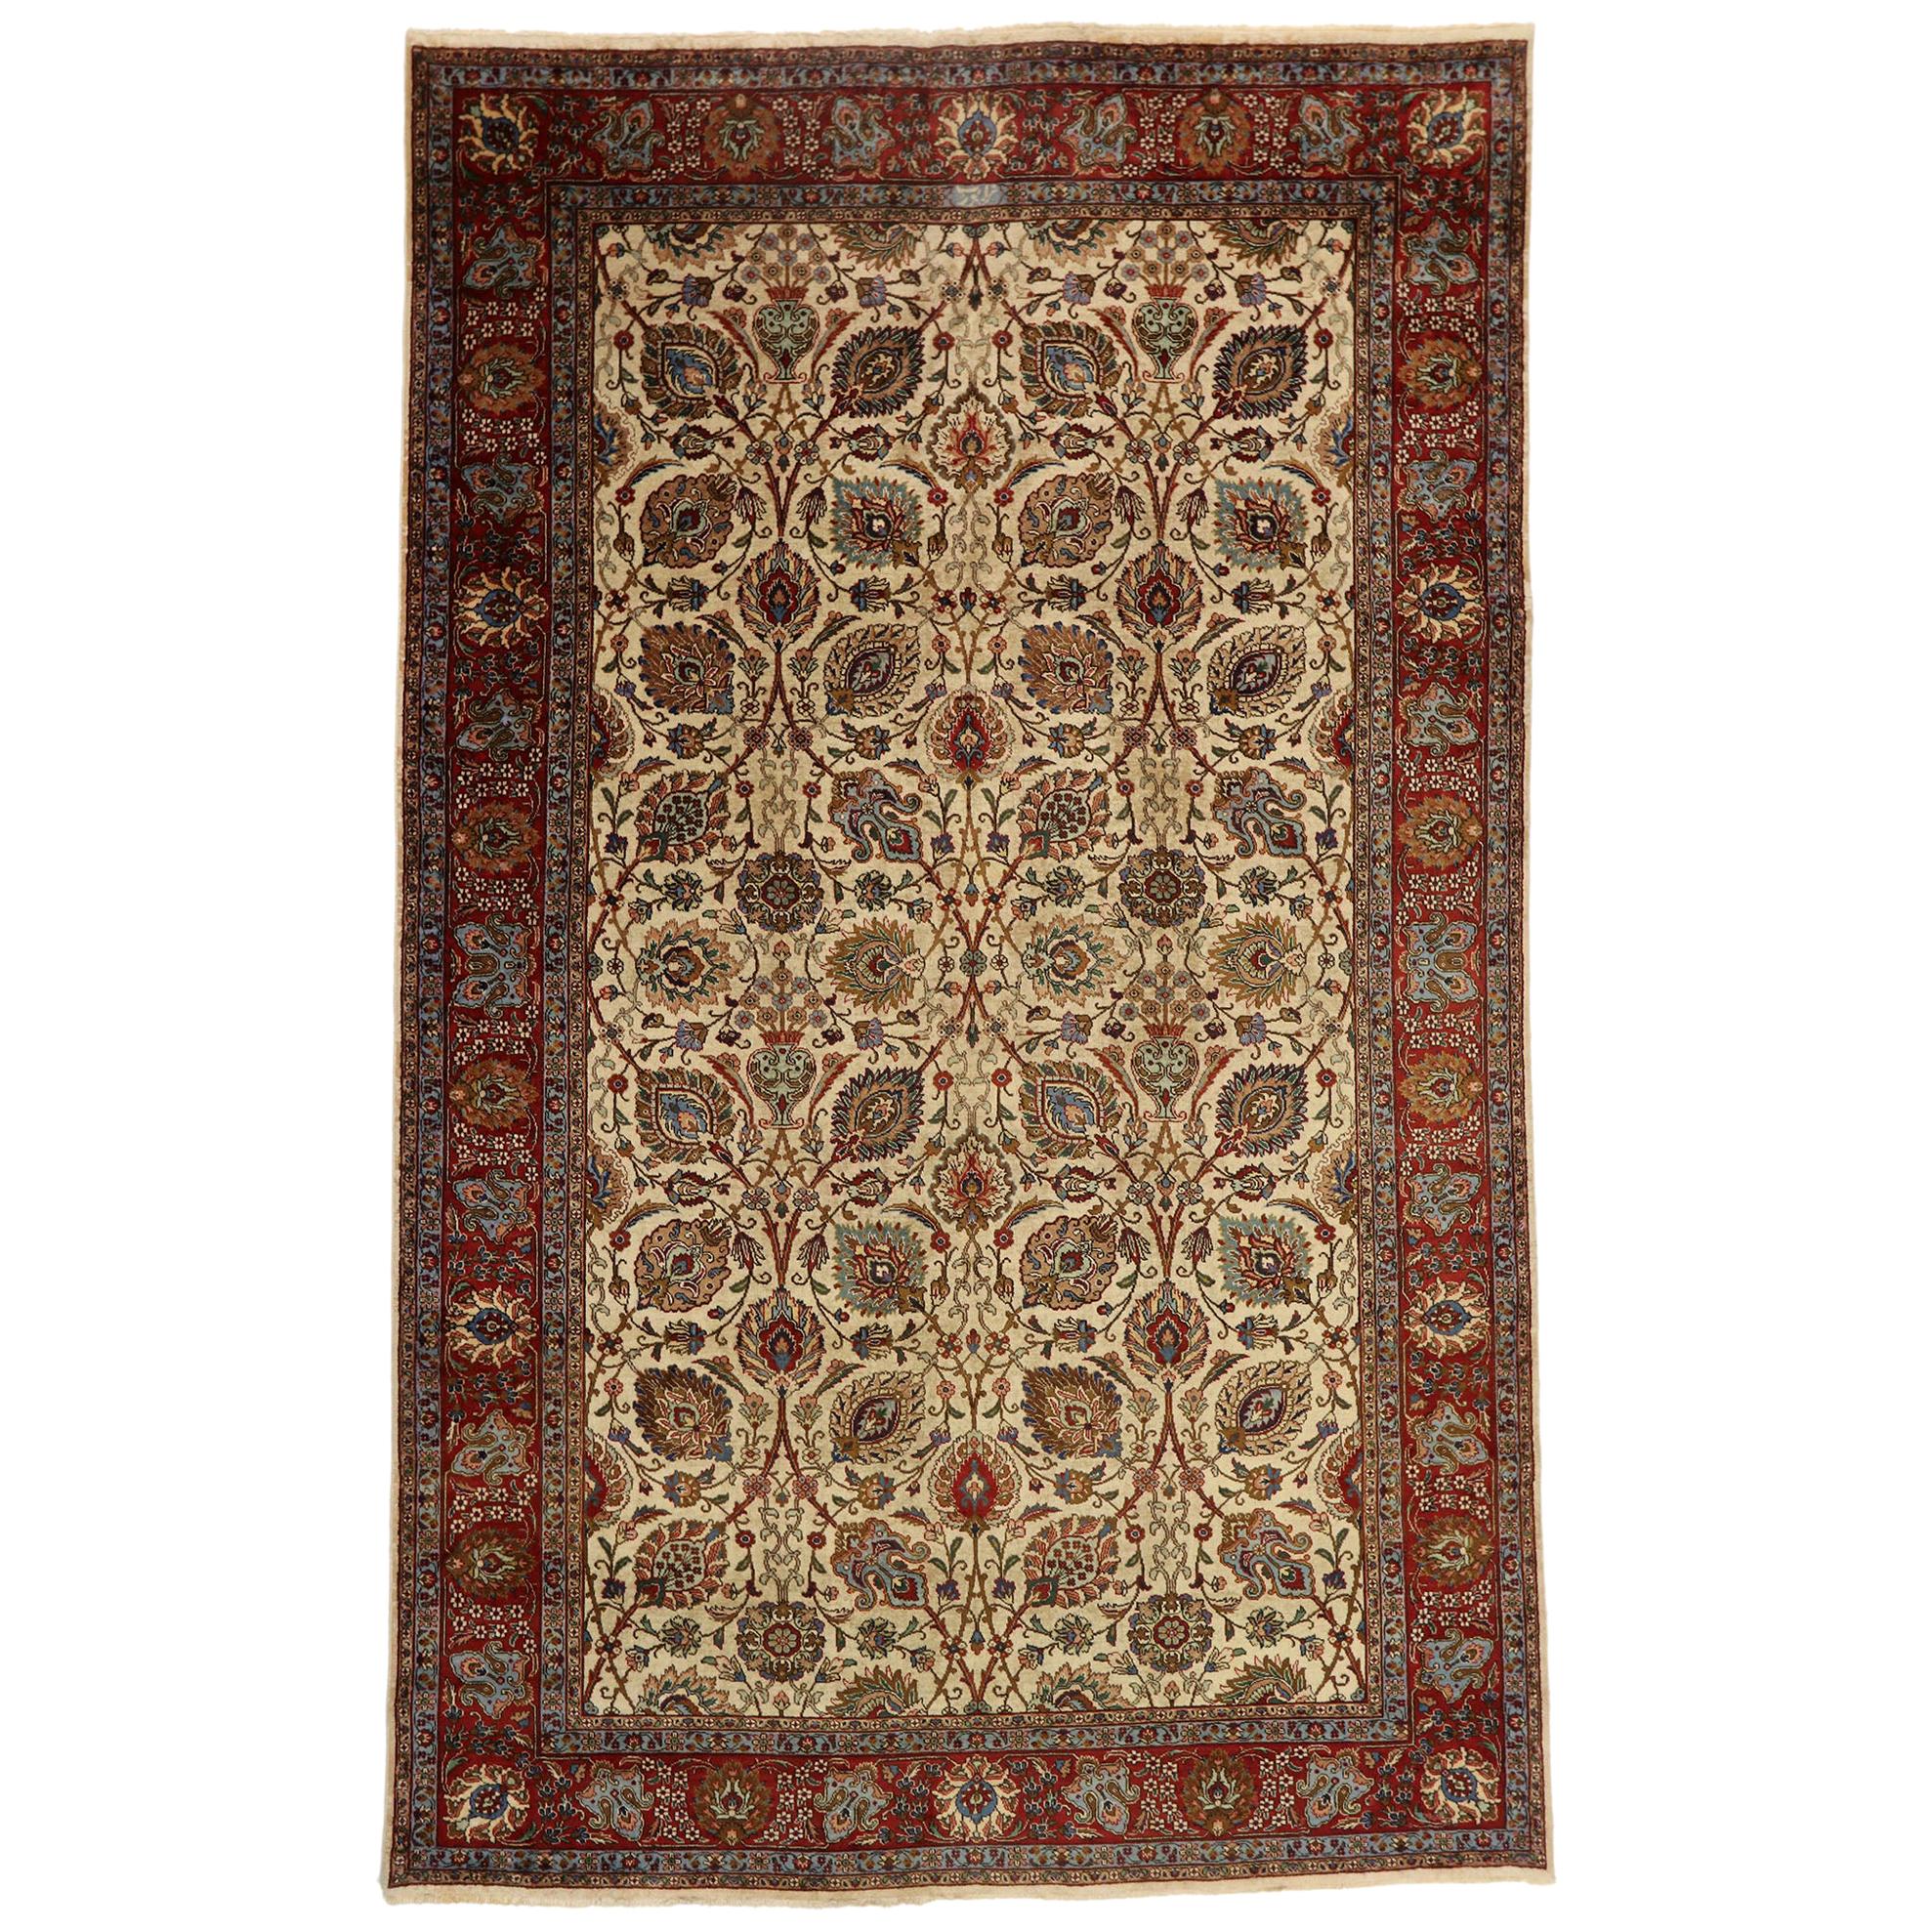 Vintage Persian Tabriz Palace Rug with Federal American Colonial Style